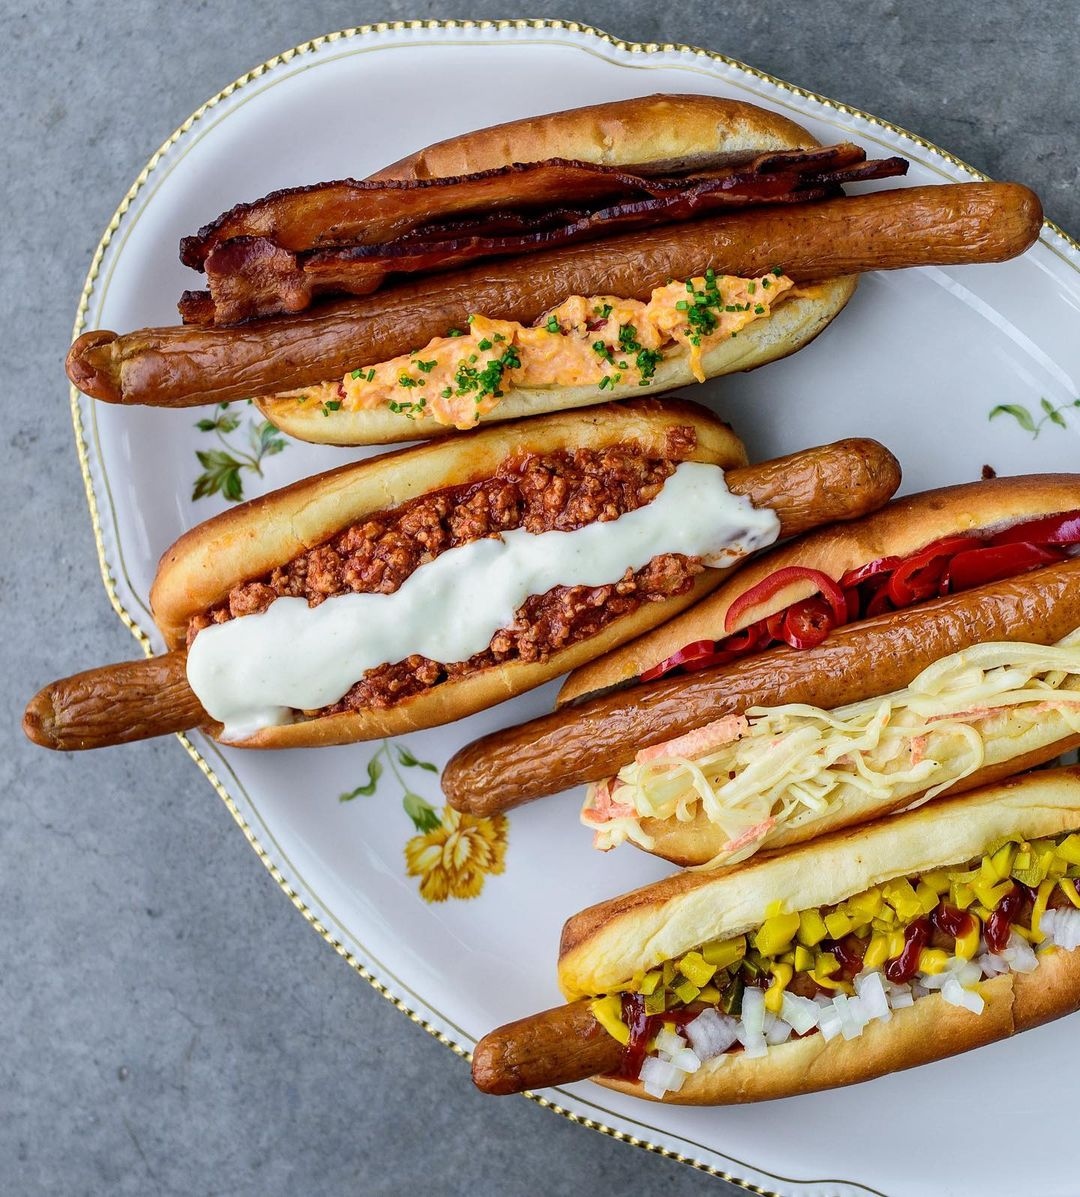 Memorial Day Plans? Plan on lunch with @st.anselm_dc! 🇺🇸🎶🌭 Feast on St. Anselm-style hotdogs, loaded with all the works, cocktails made with new single barrel bourbon and live bluegrass music by @dunlapandmabe. Book your lunch reservation now: bit.ly/3MWivE5